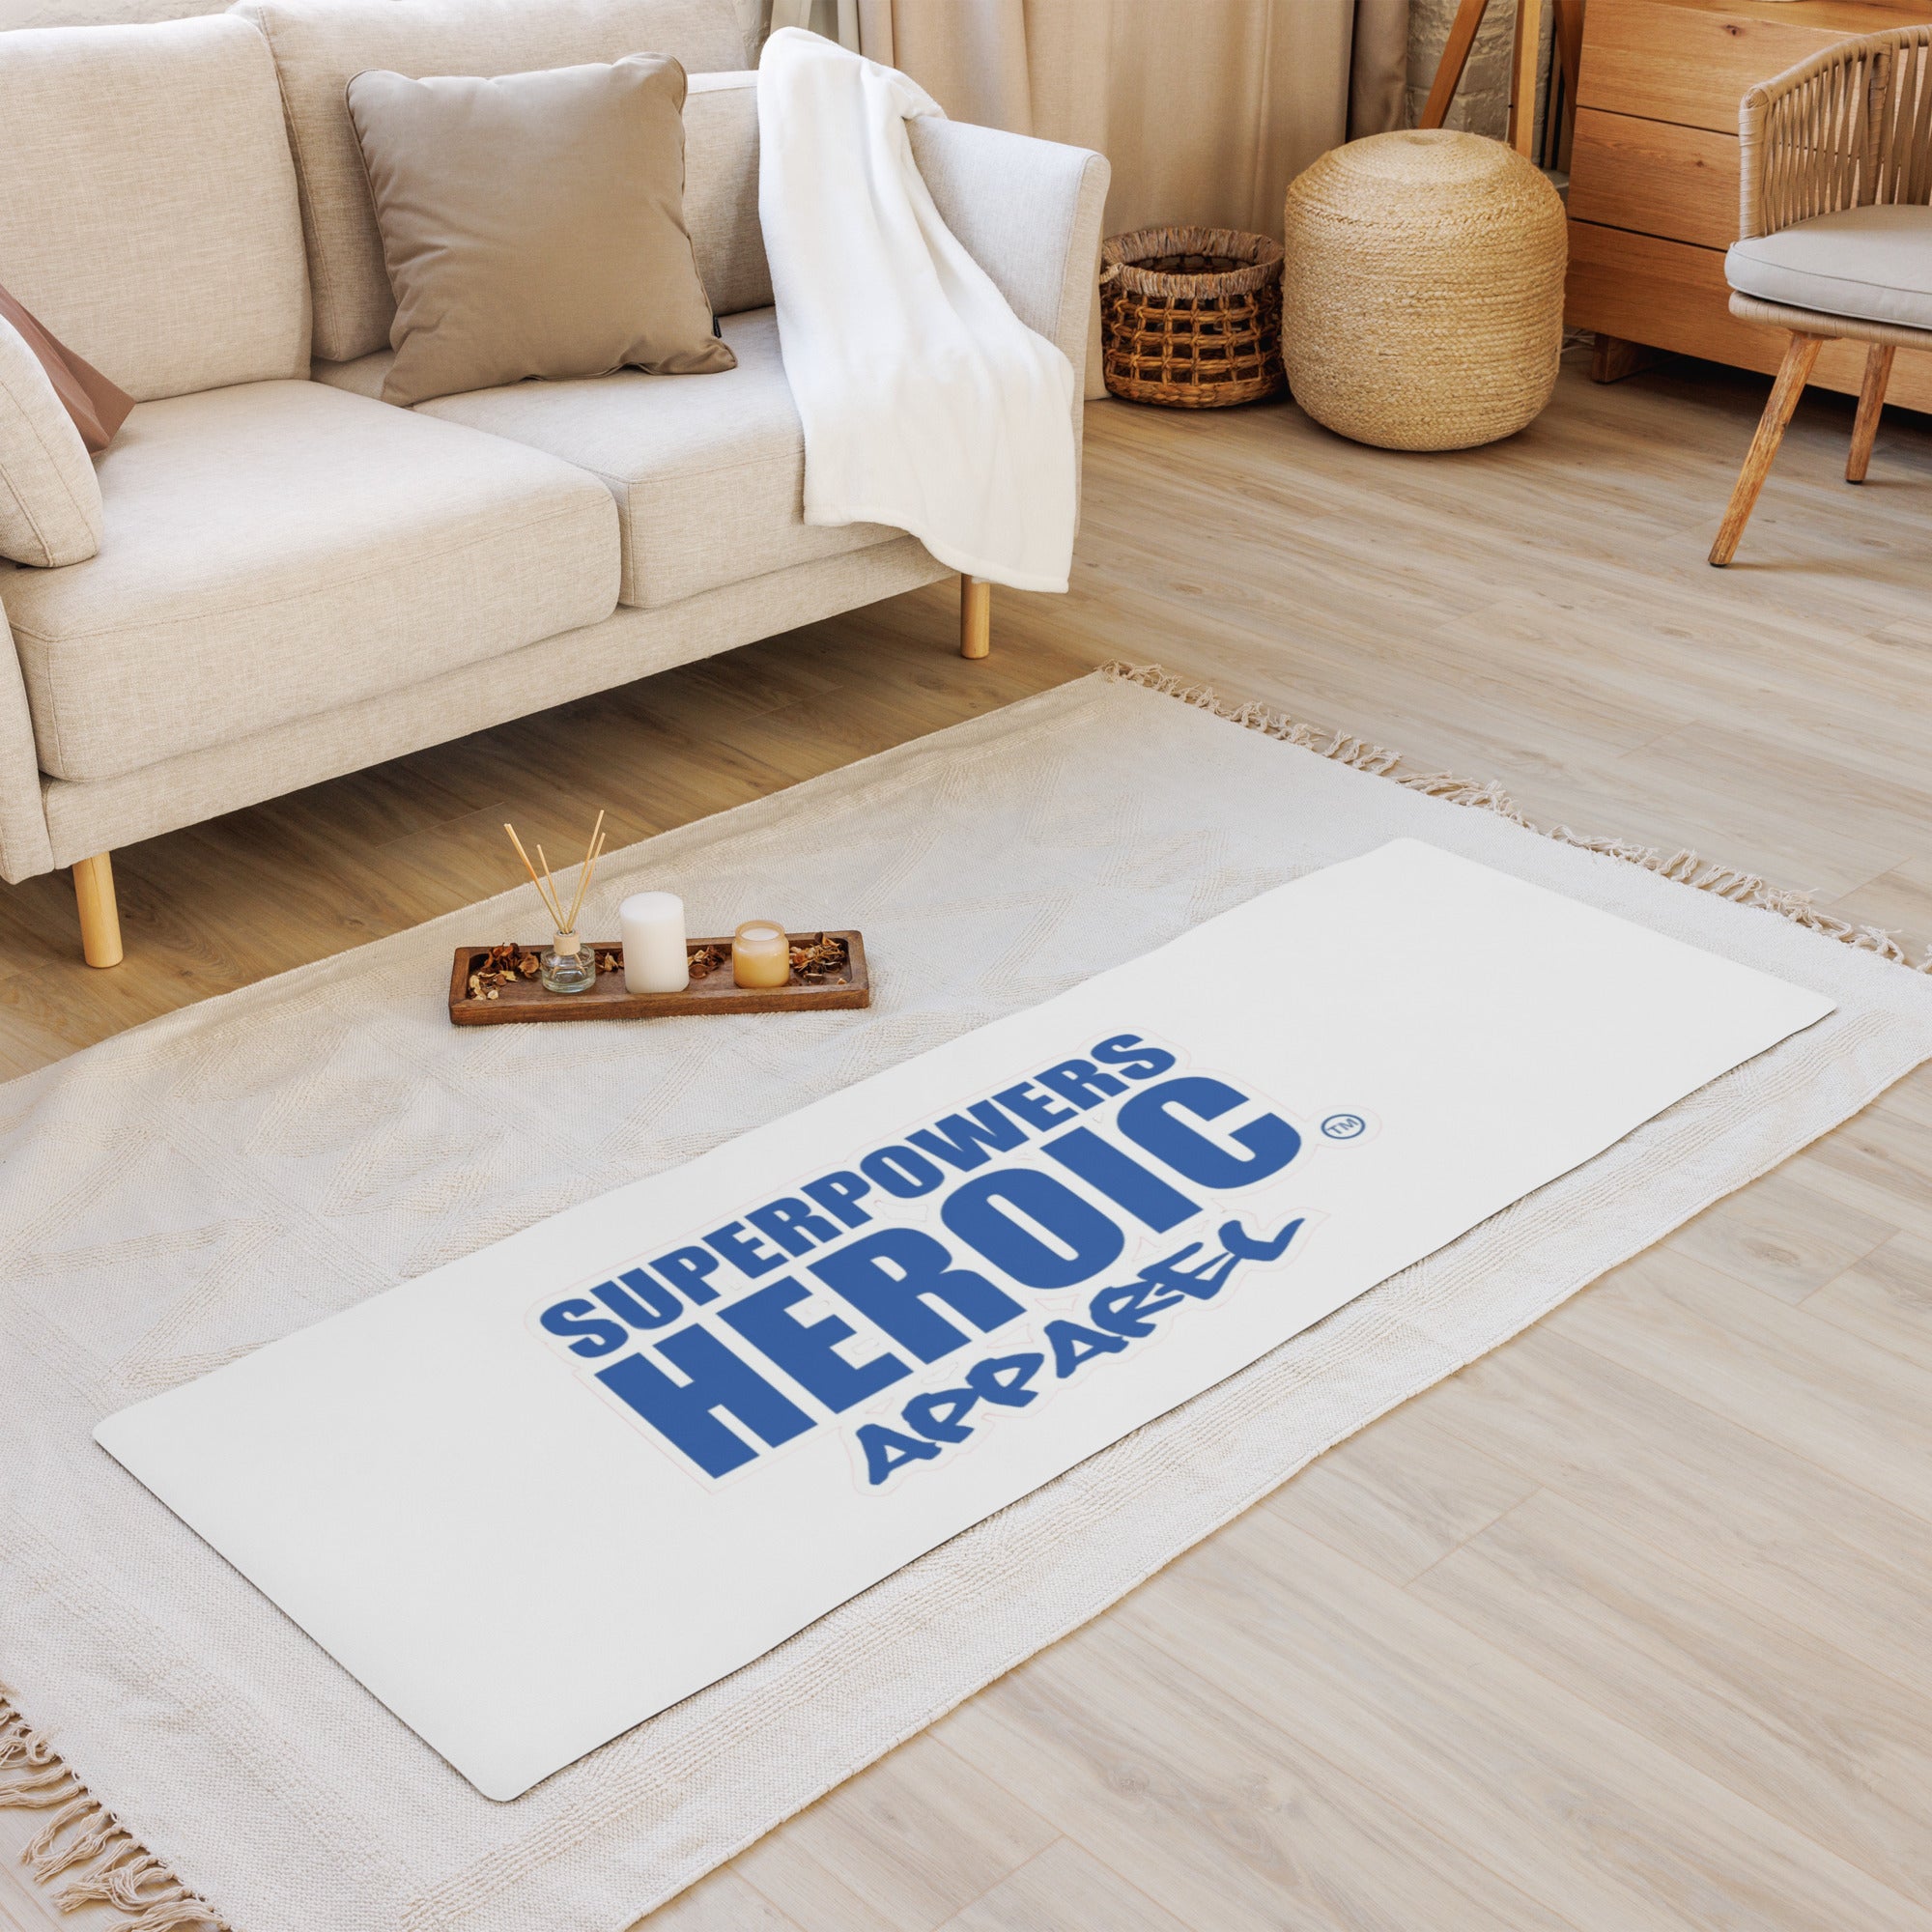 SUPERPOWERS HEROIC APPAREL (A) Yoga Mat - SUPERPOWERS HEROIC APPAREL